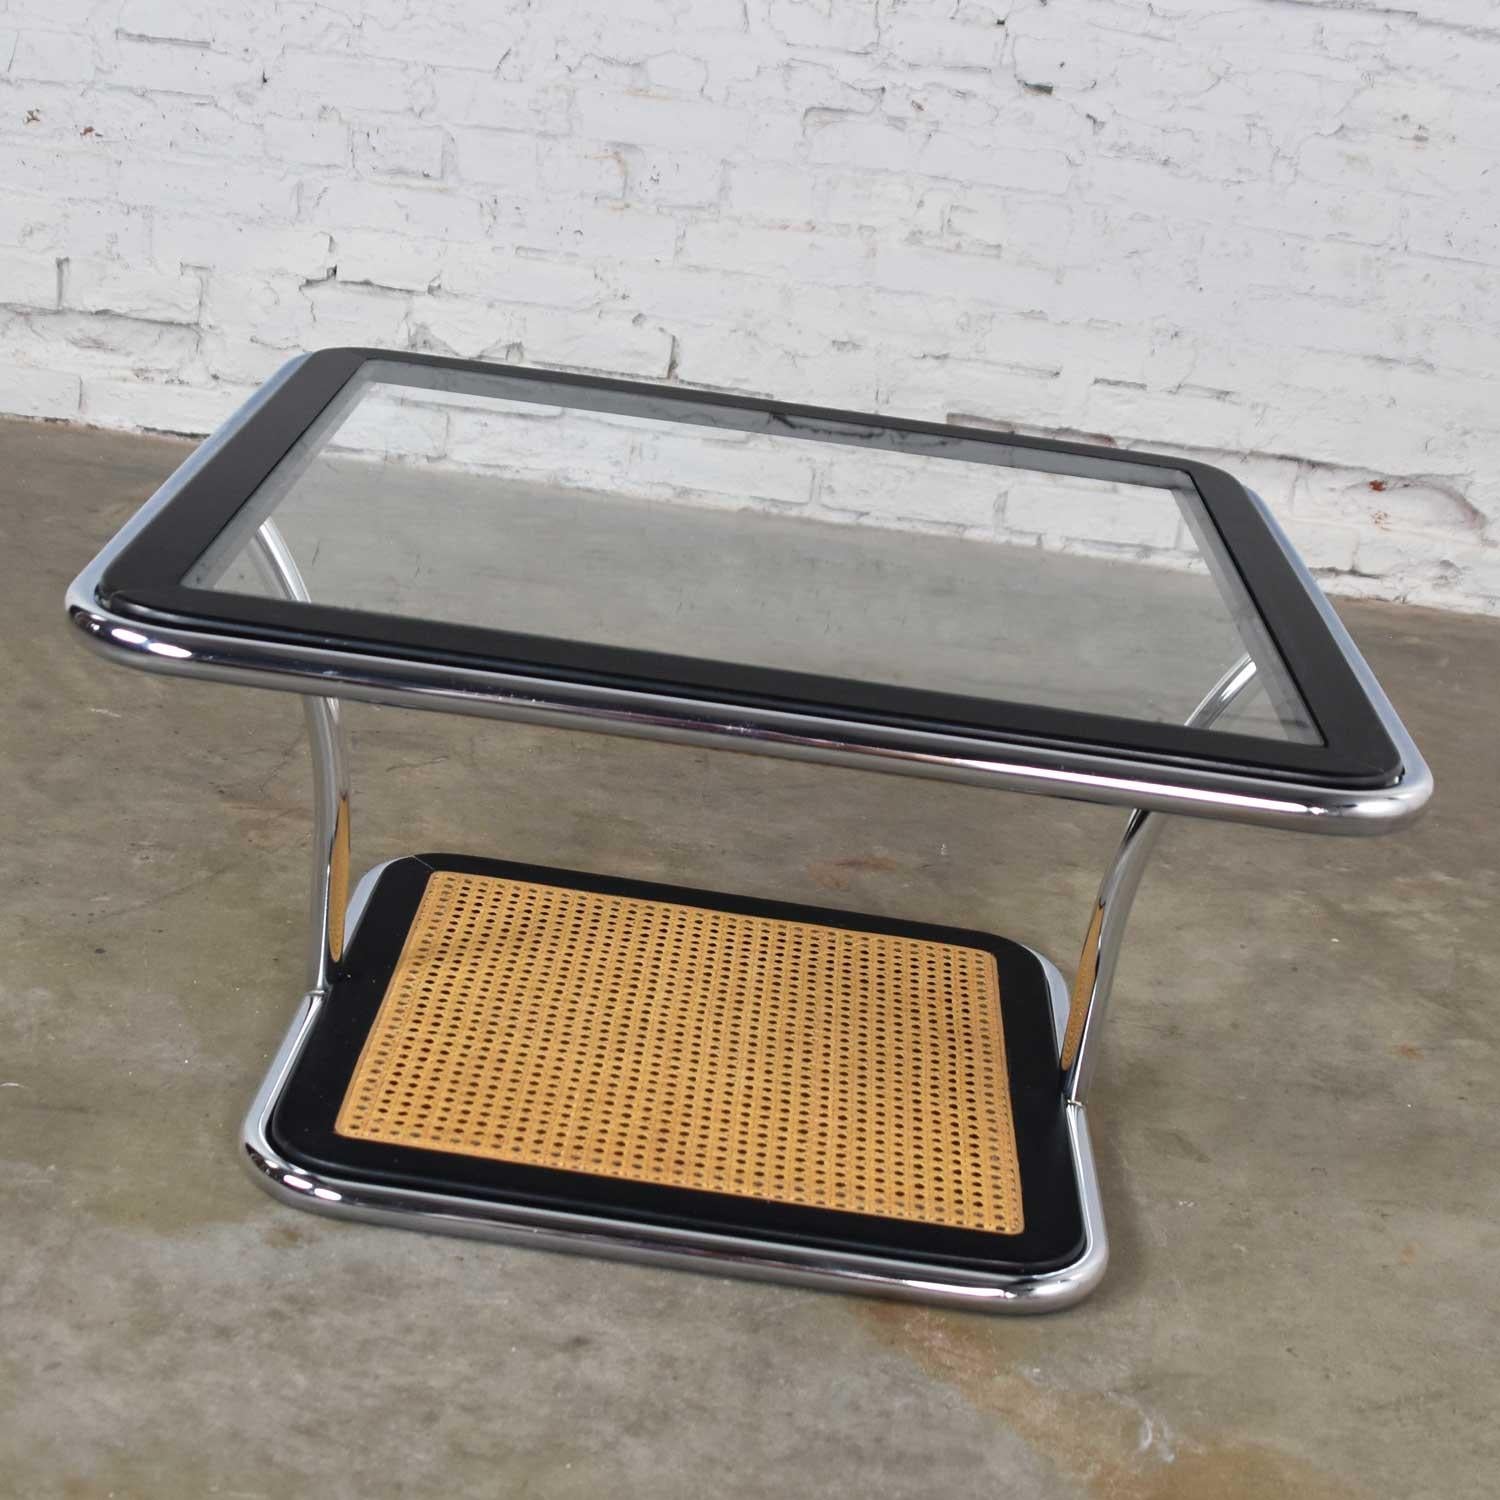 Handsome Bauhaus style bent chrome tube, black painted wood, cane, and glass rounded square coffee table or end table in the style of Marcel Breuer but actually designed by Arthur Umanoff for Thonet. It is in wonderful vintage condition with no